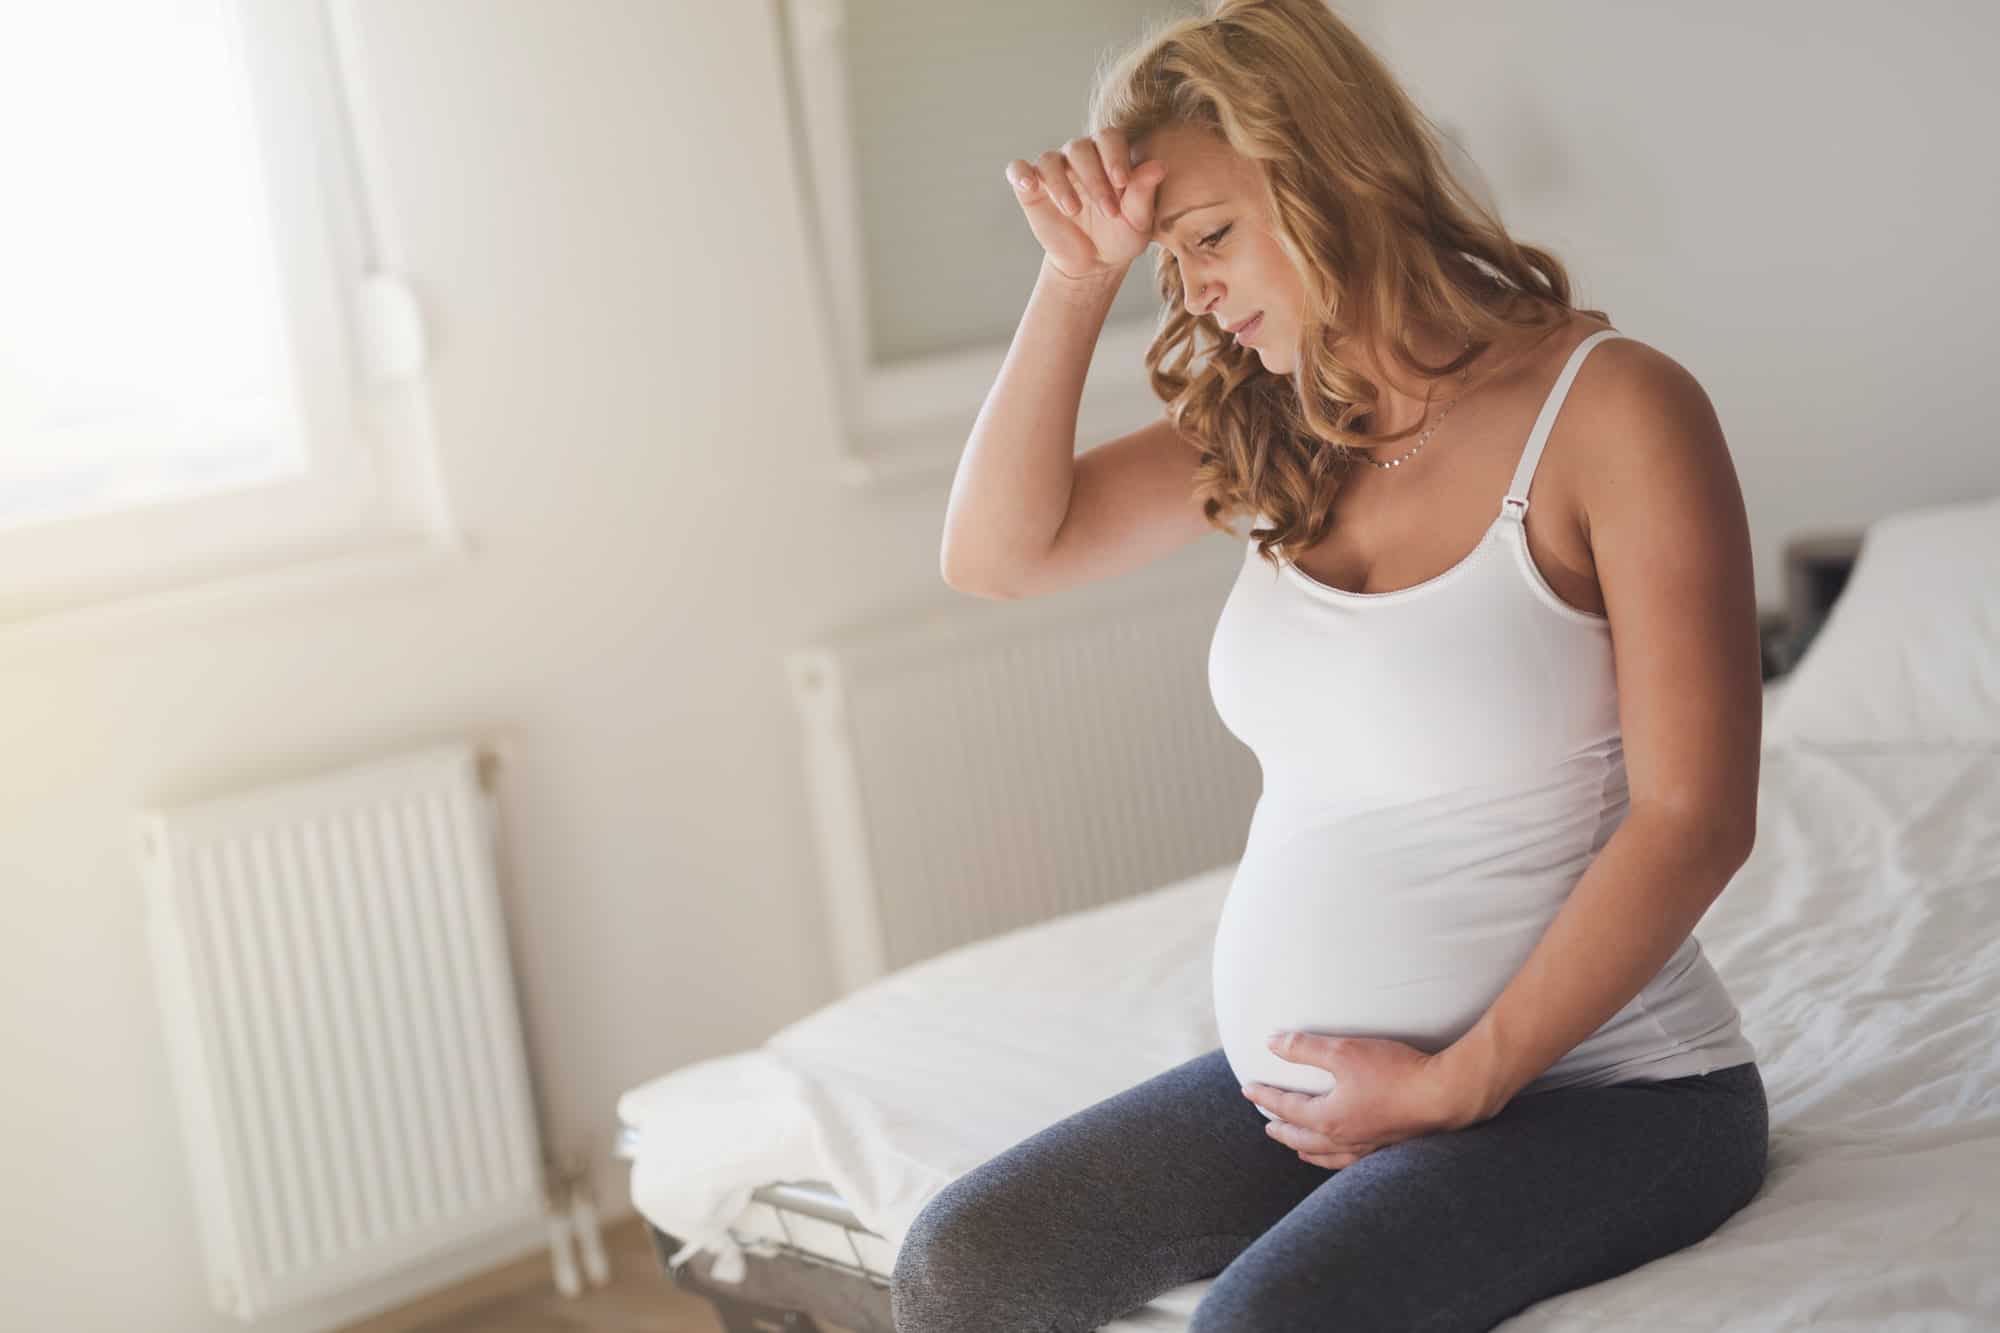 5 Annoying Pregnancy Pains and How to Relieve Them